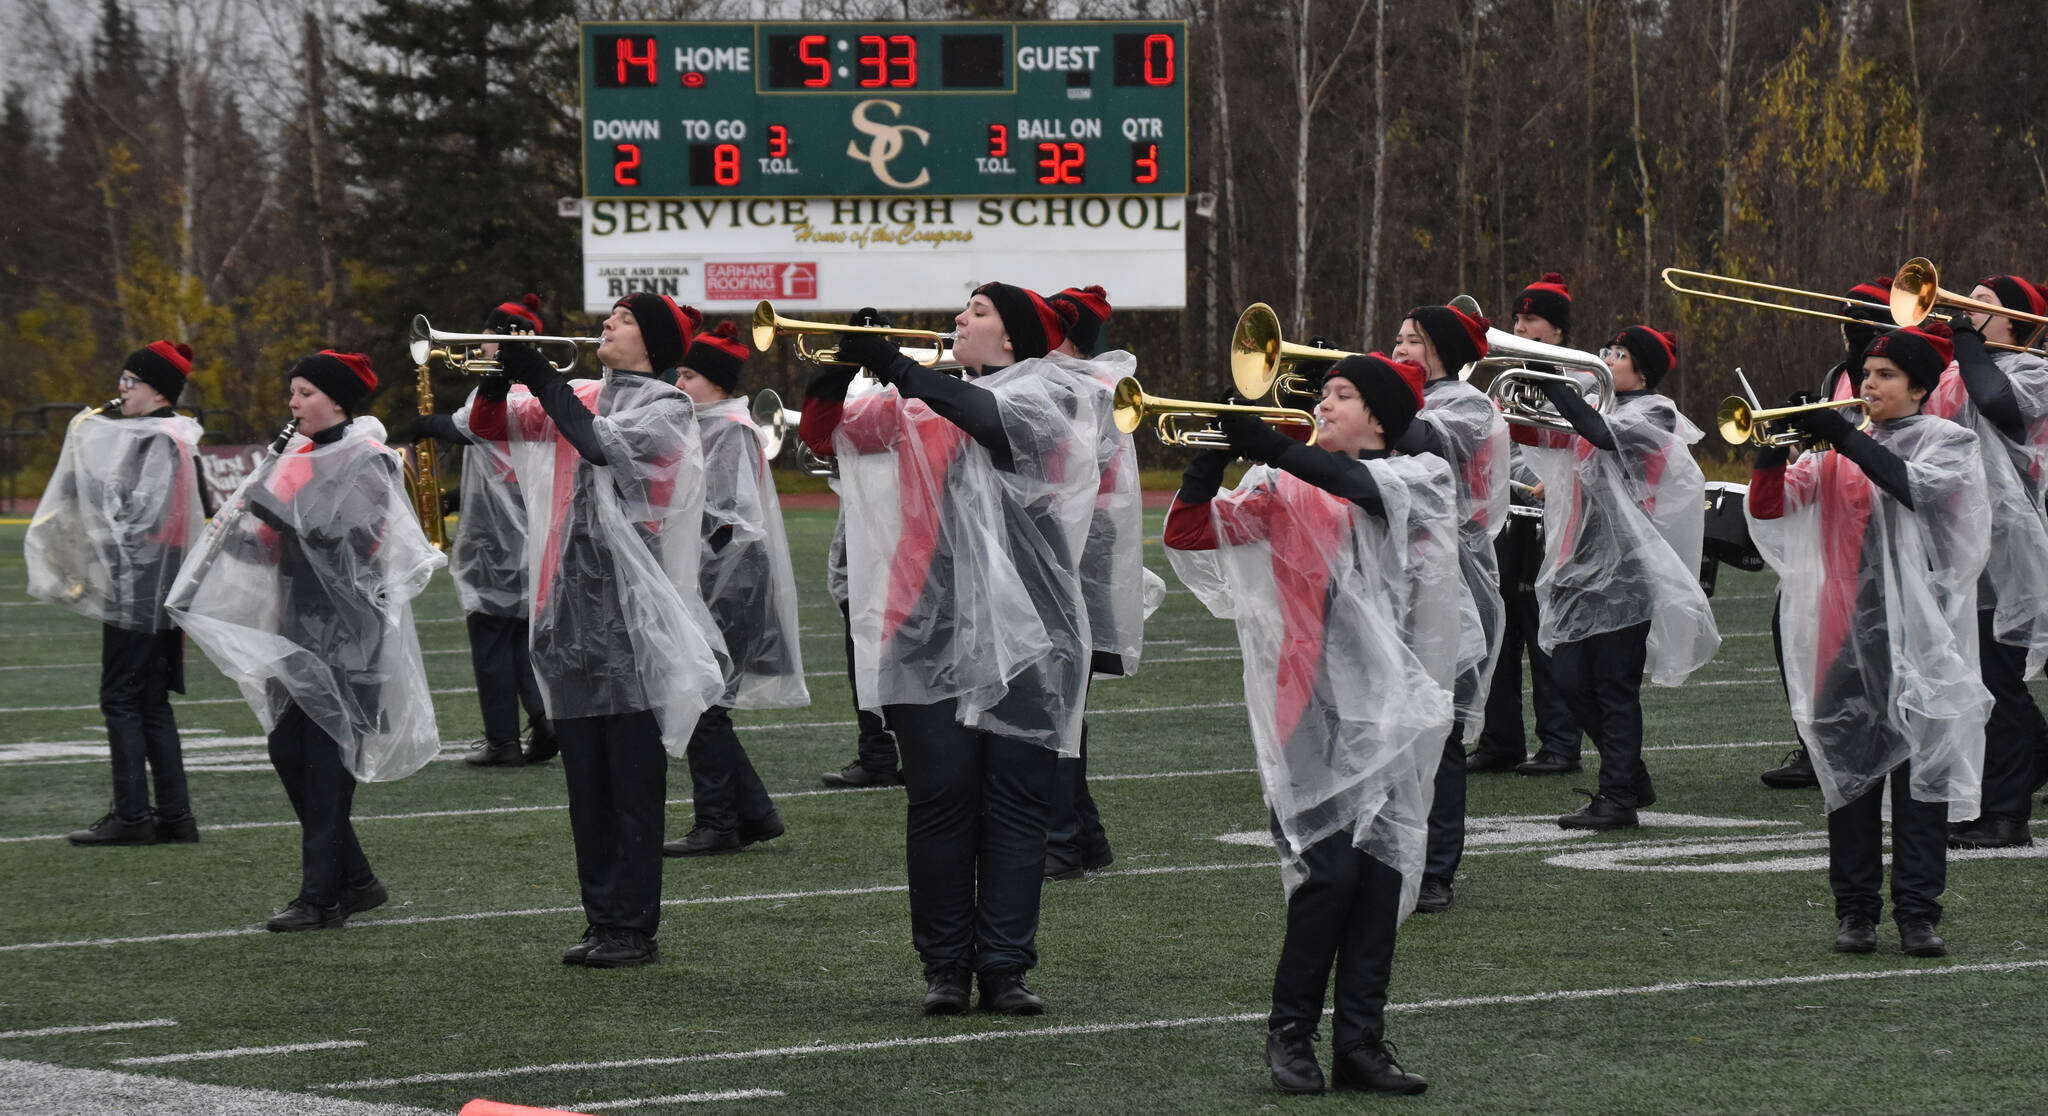 The Kenai Central marching band performs at halftime Saturday, Oct. 14, 2023, in the Division III state championship game at Service High School in Anchorage, Alaska. (Photo by Jeff Helminiak/Peninsula Clarion)